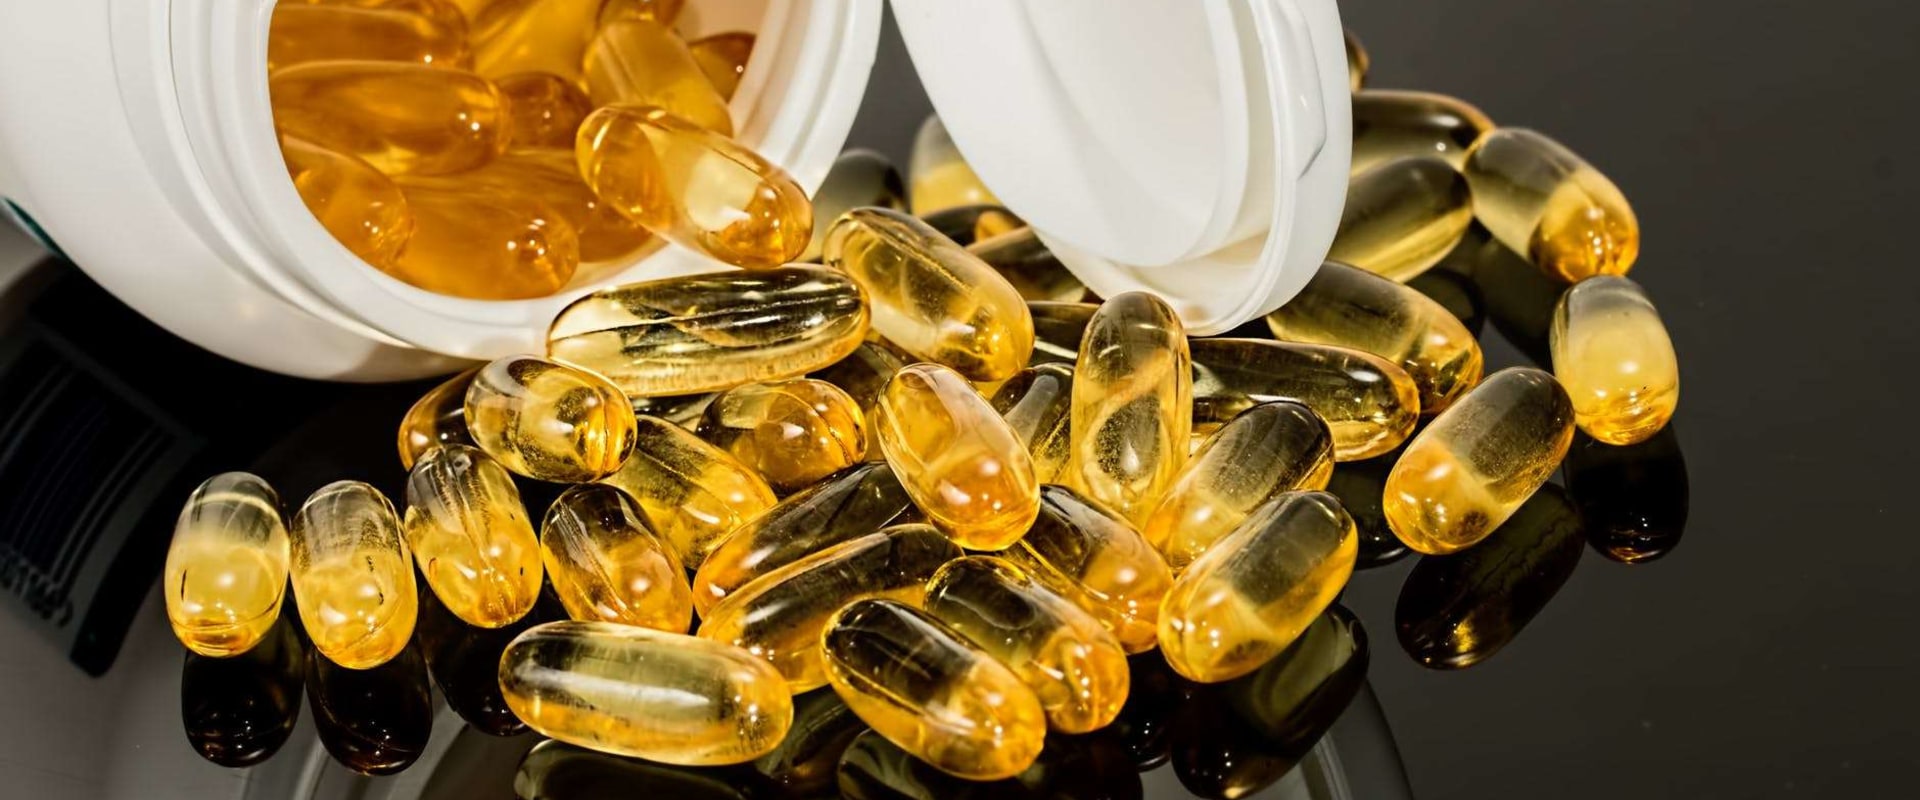 When Should You Start Taking Vitamins and Supplements? A Guide for All Ages